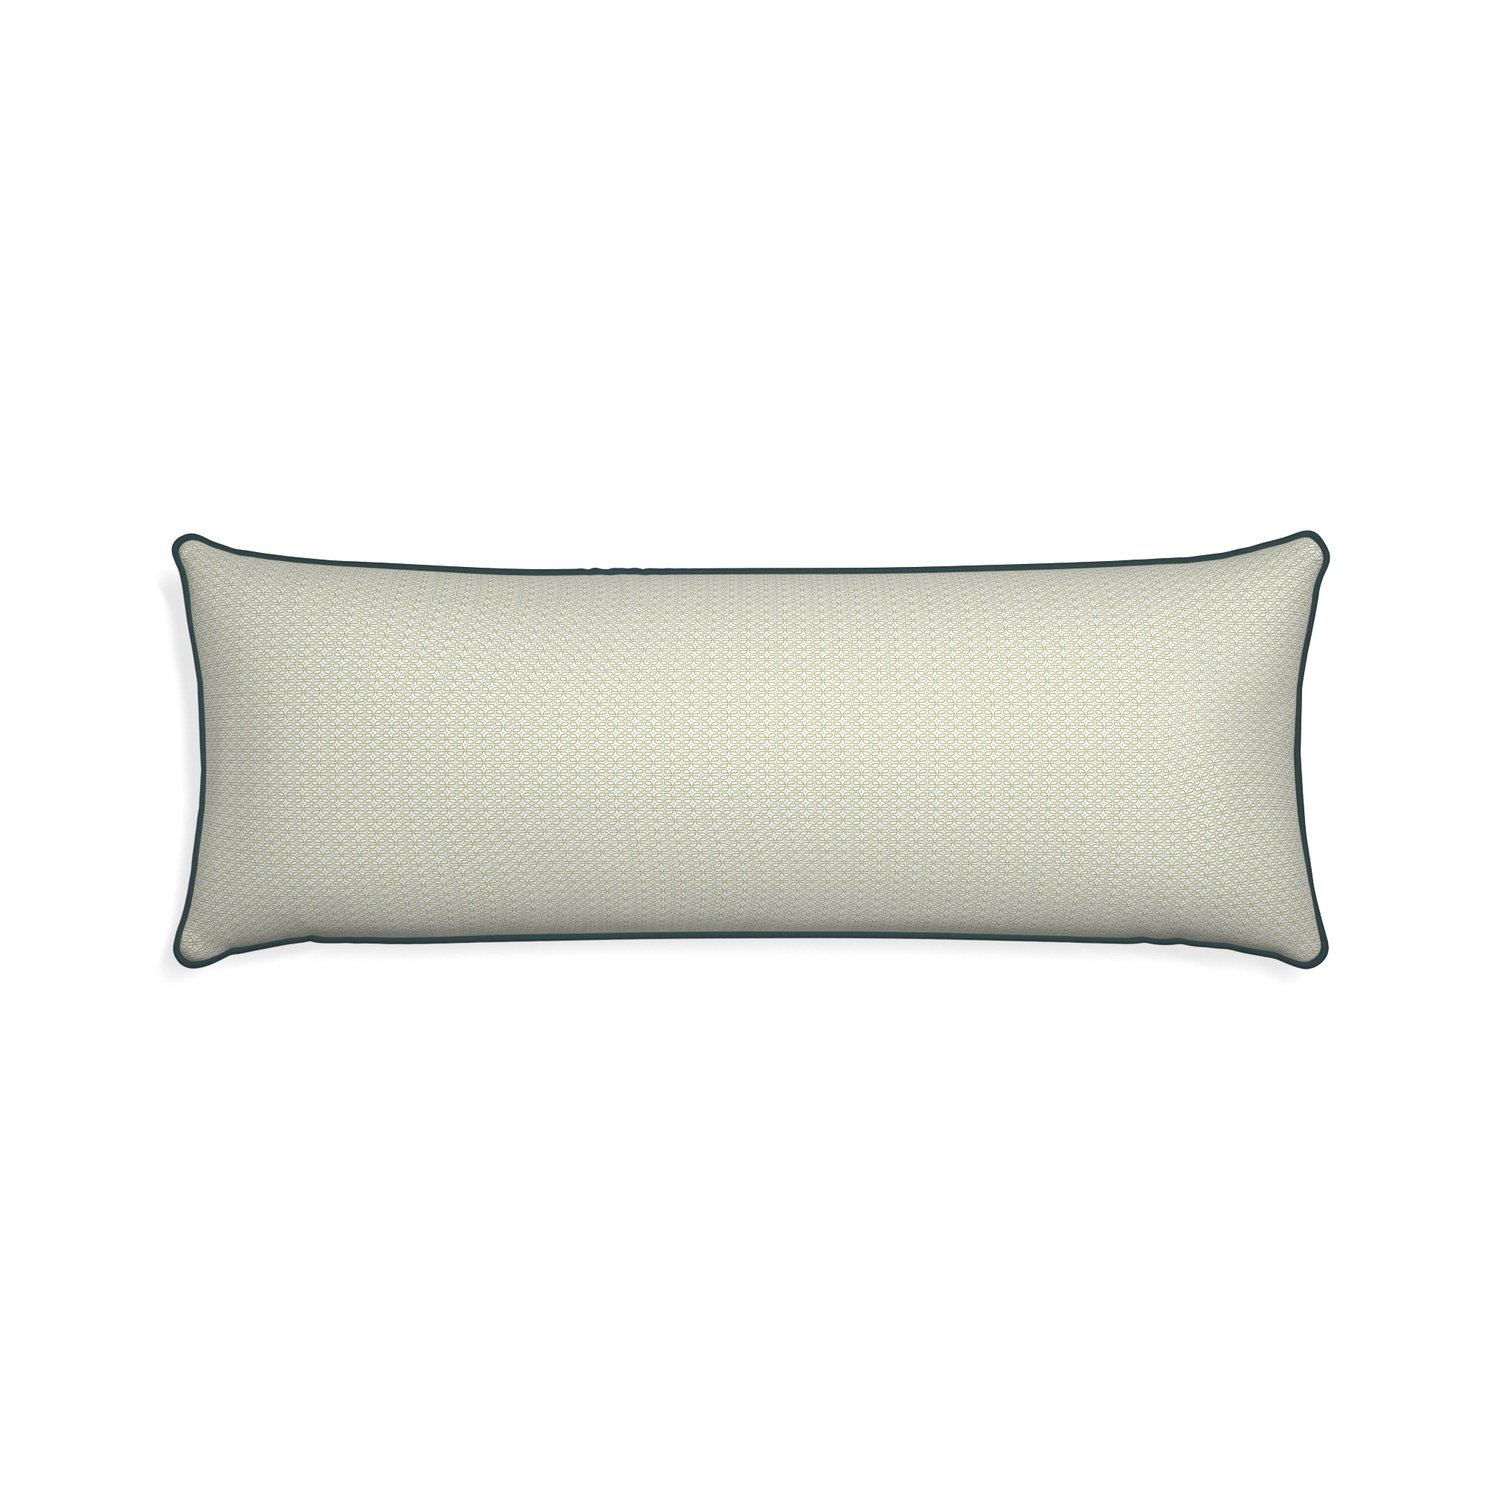 Xl-lumbar loomi moss custom moss green geometricpillow with p piping on white background